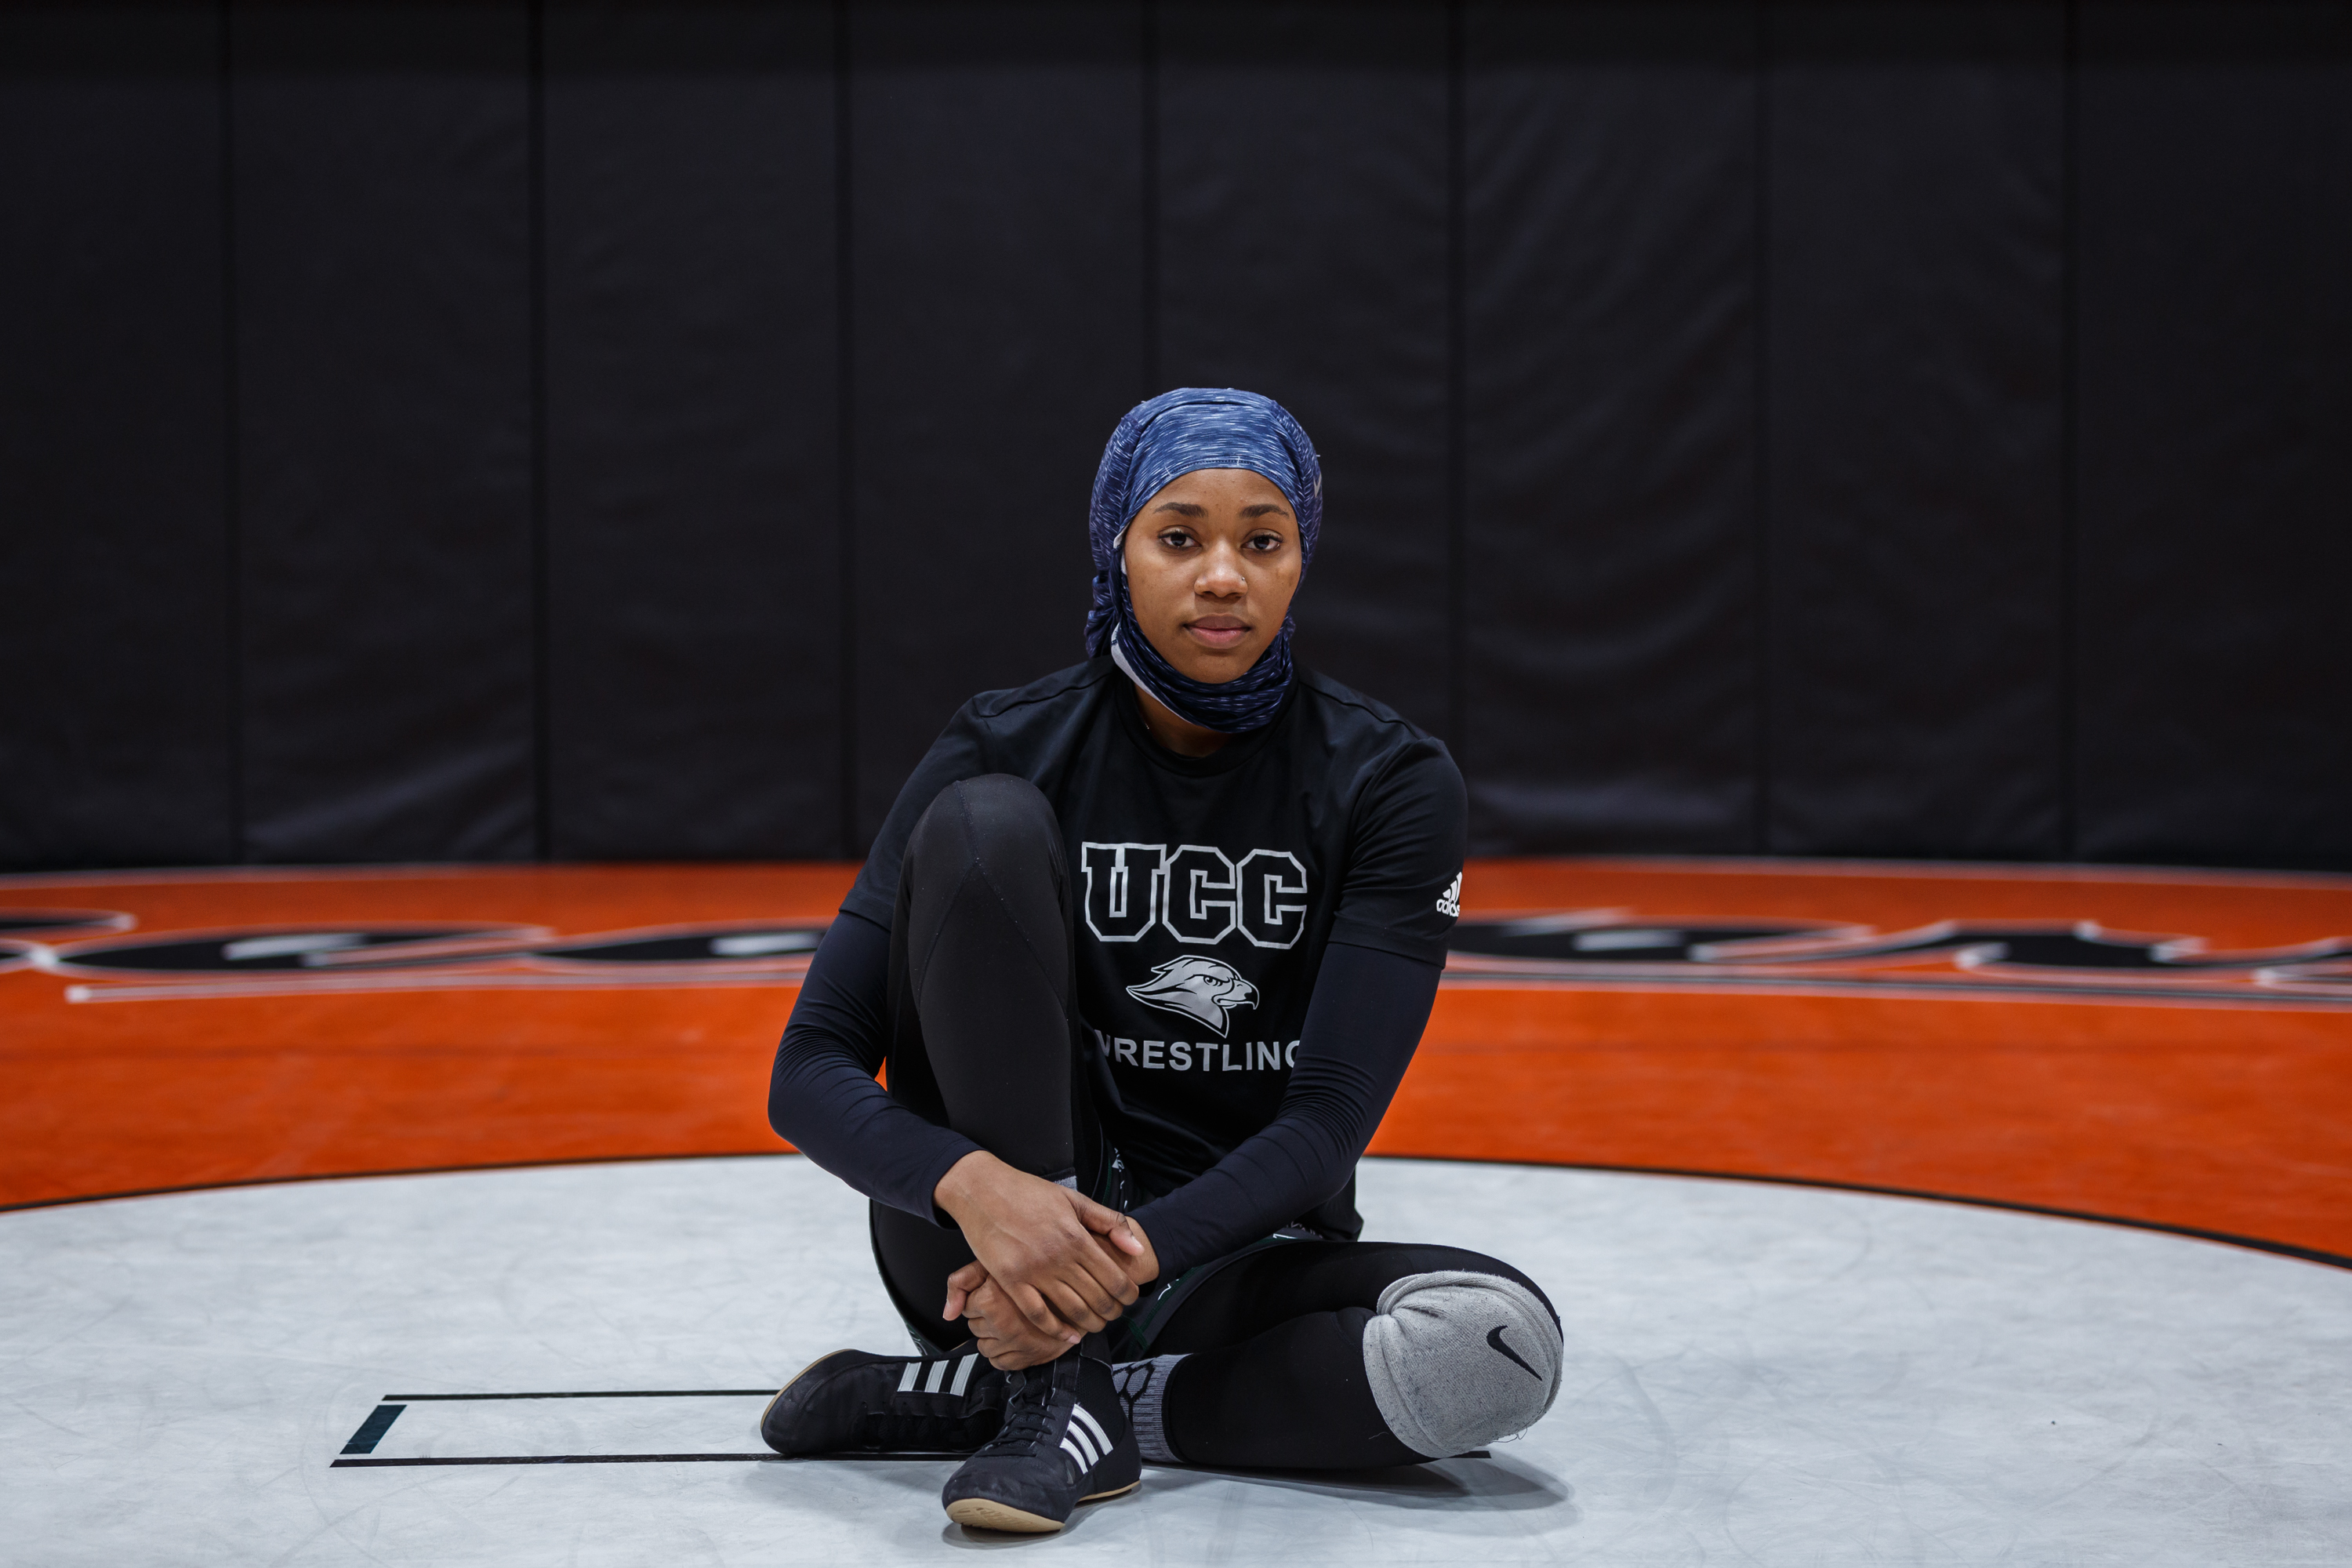 Muslim Women Wrestlers Say They Face Discrimination HuffPost Women image pic